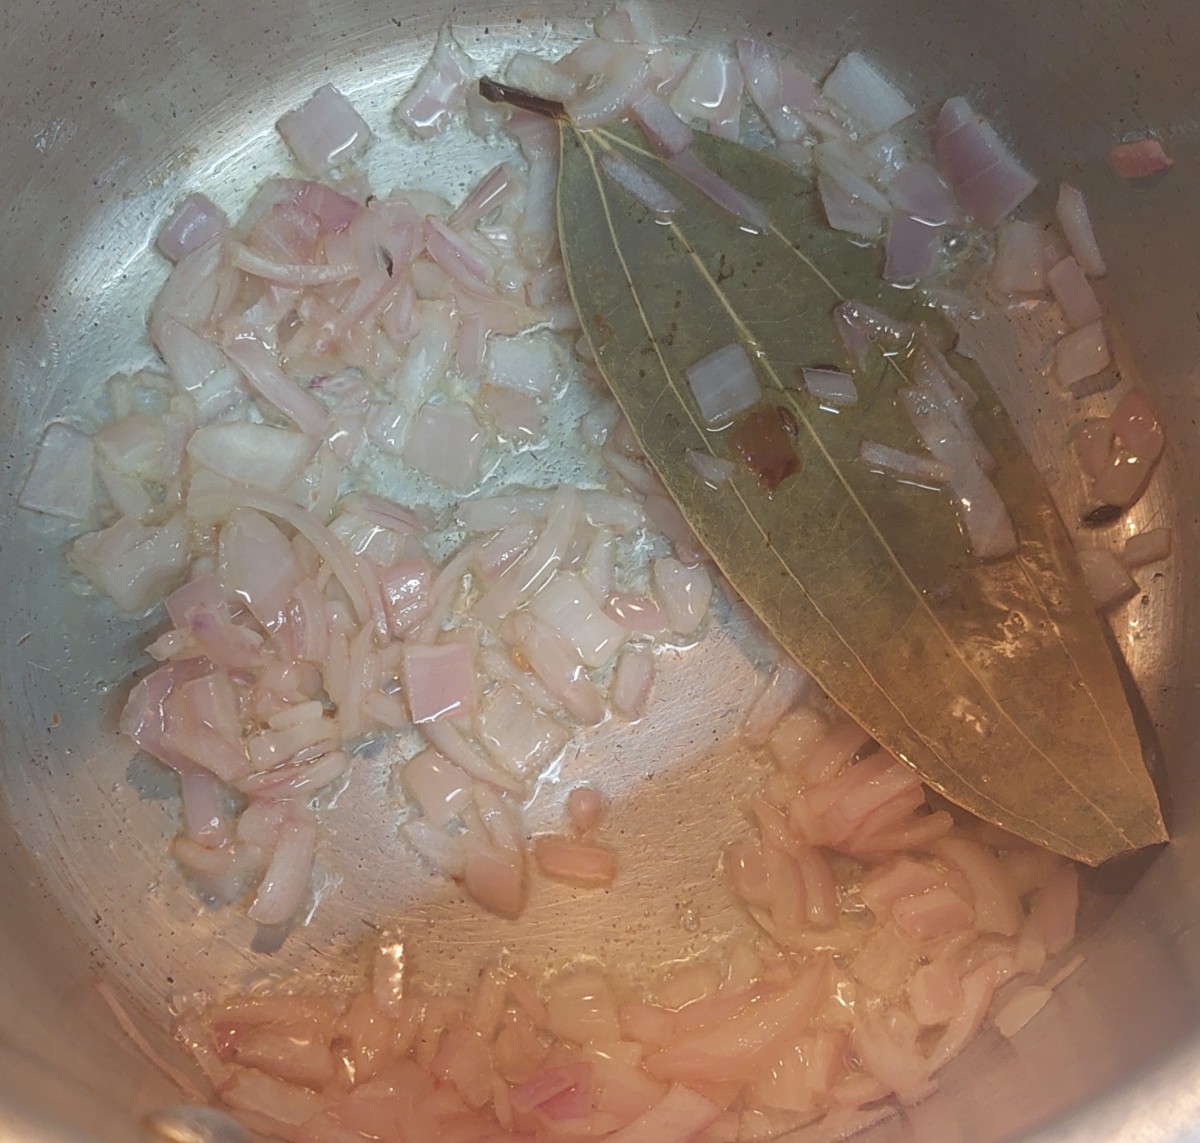 In a cooker, heat 1 tablespoon of oil. Add bay leaf and finely chopped onion. Fry till onion turns translucent.